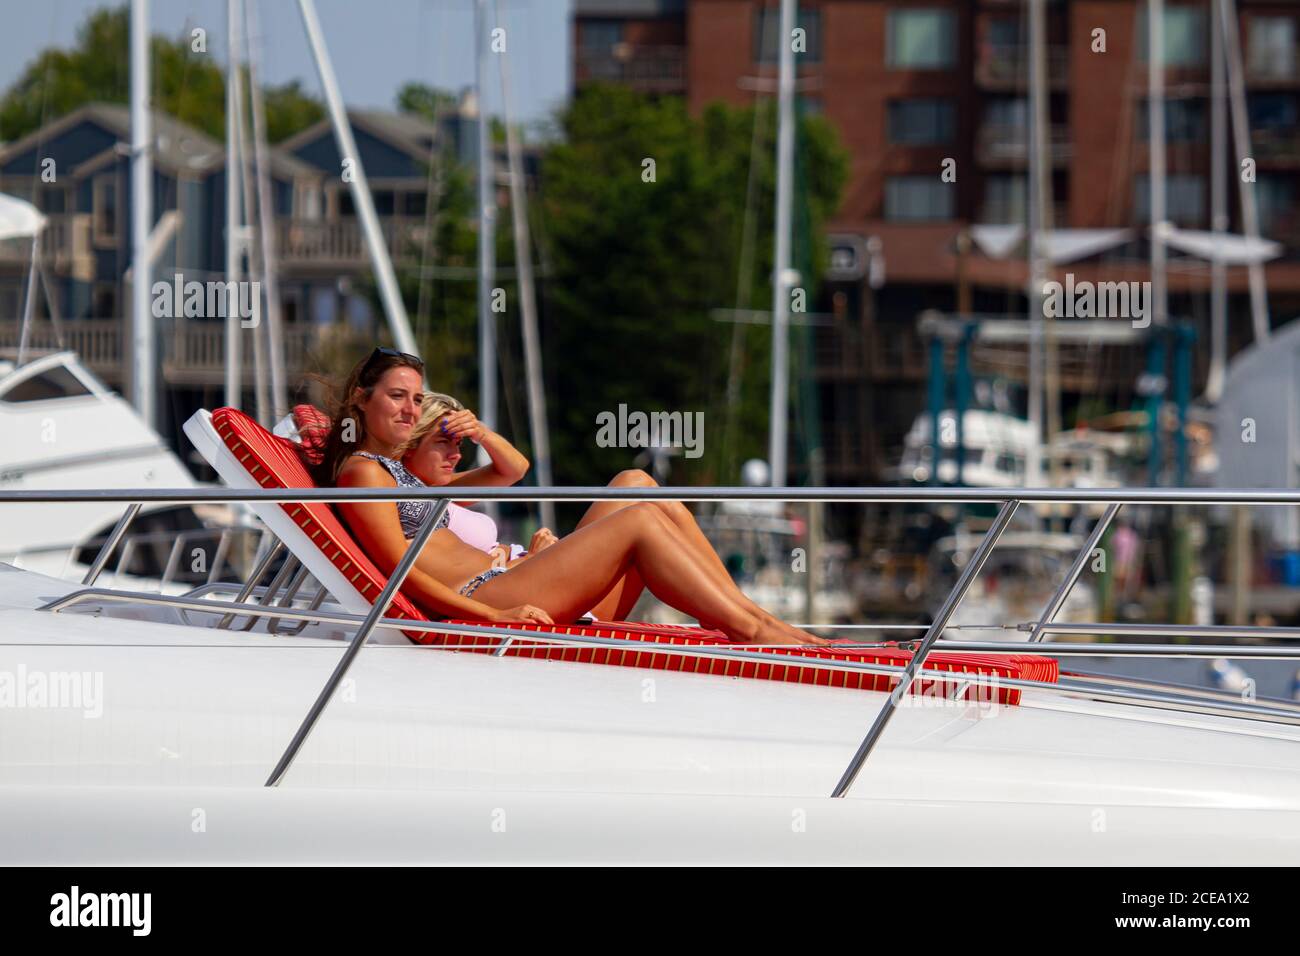 Annapolis, MD 08/21/2020: A blonde and a brunette woman are sunbathing on the deck of a yacht entering Annapolis marina. These young and beautiful wom Stock Photo